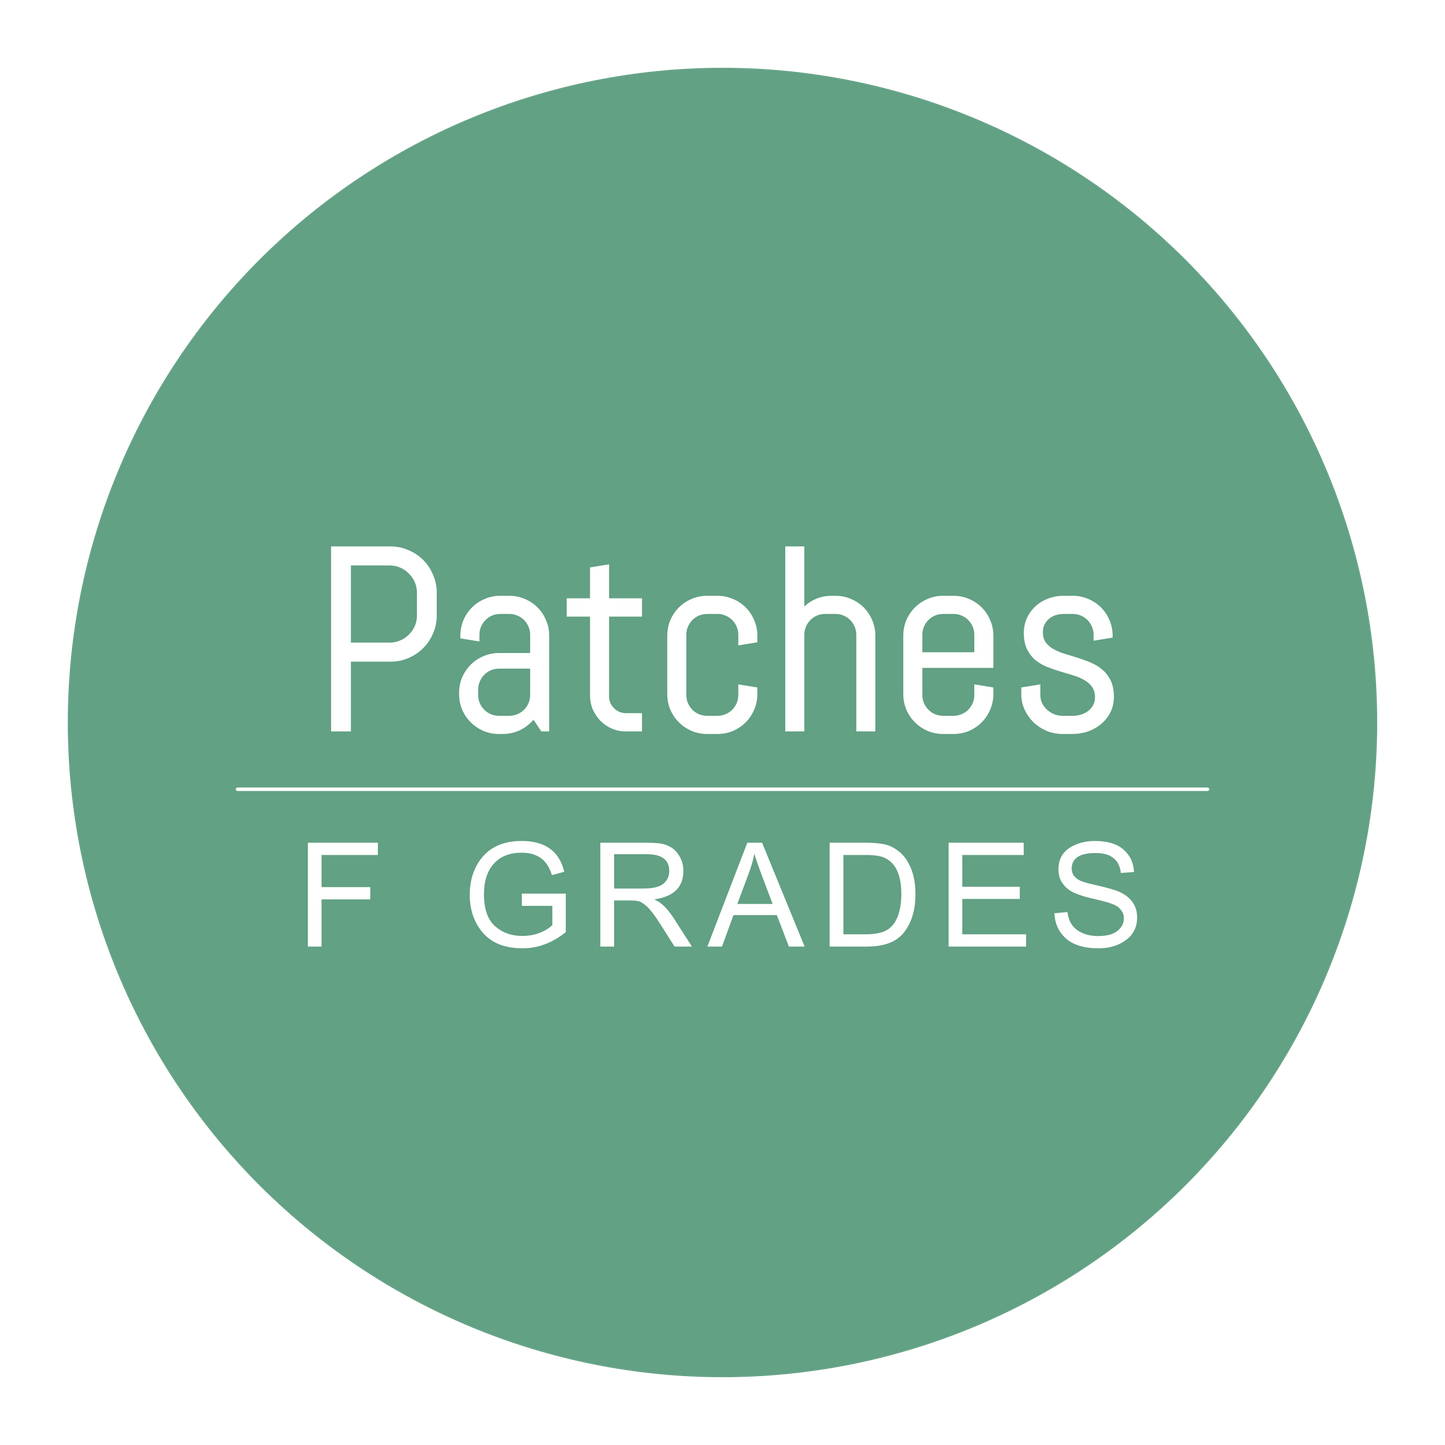 F grades - Embroidered patches